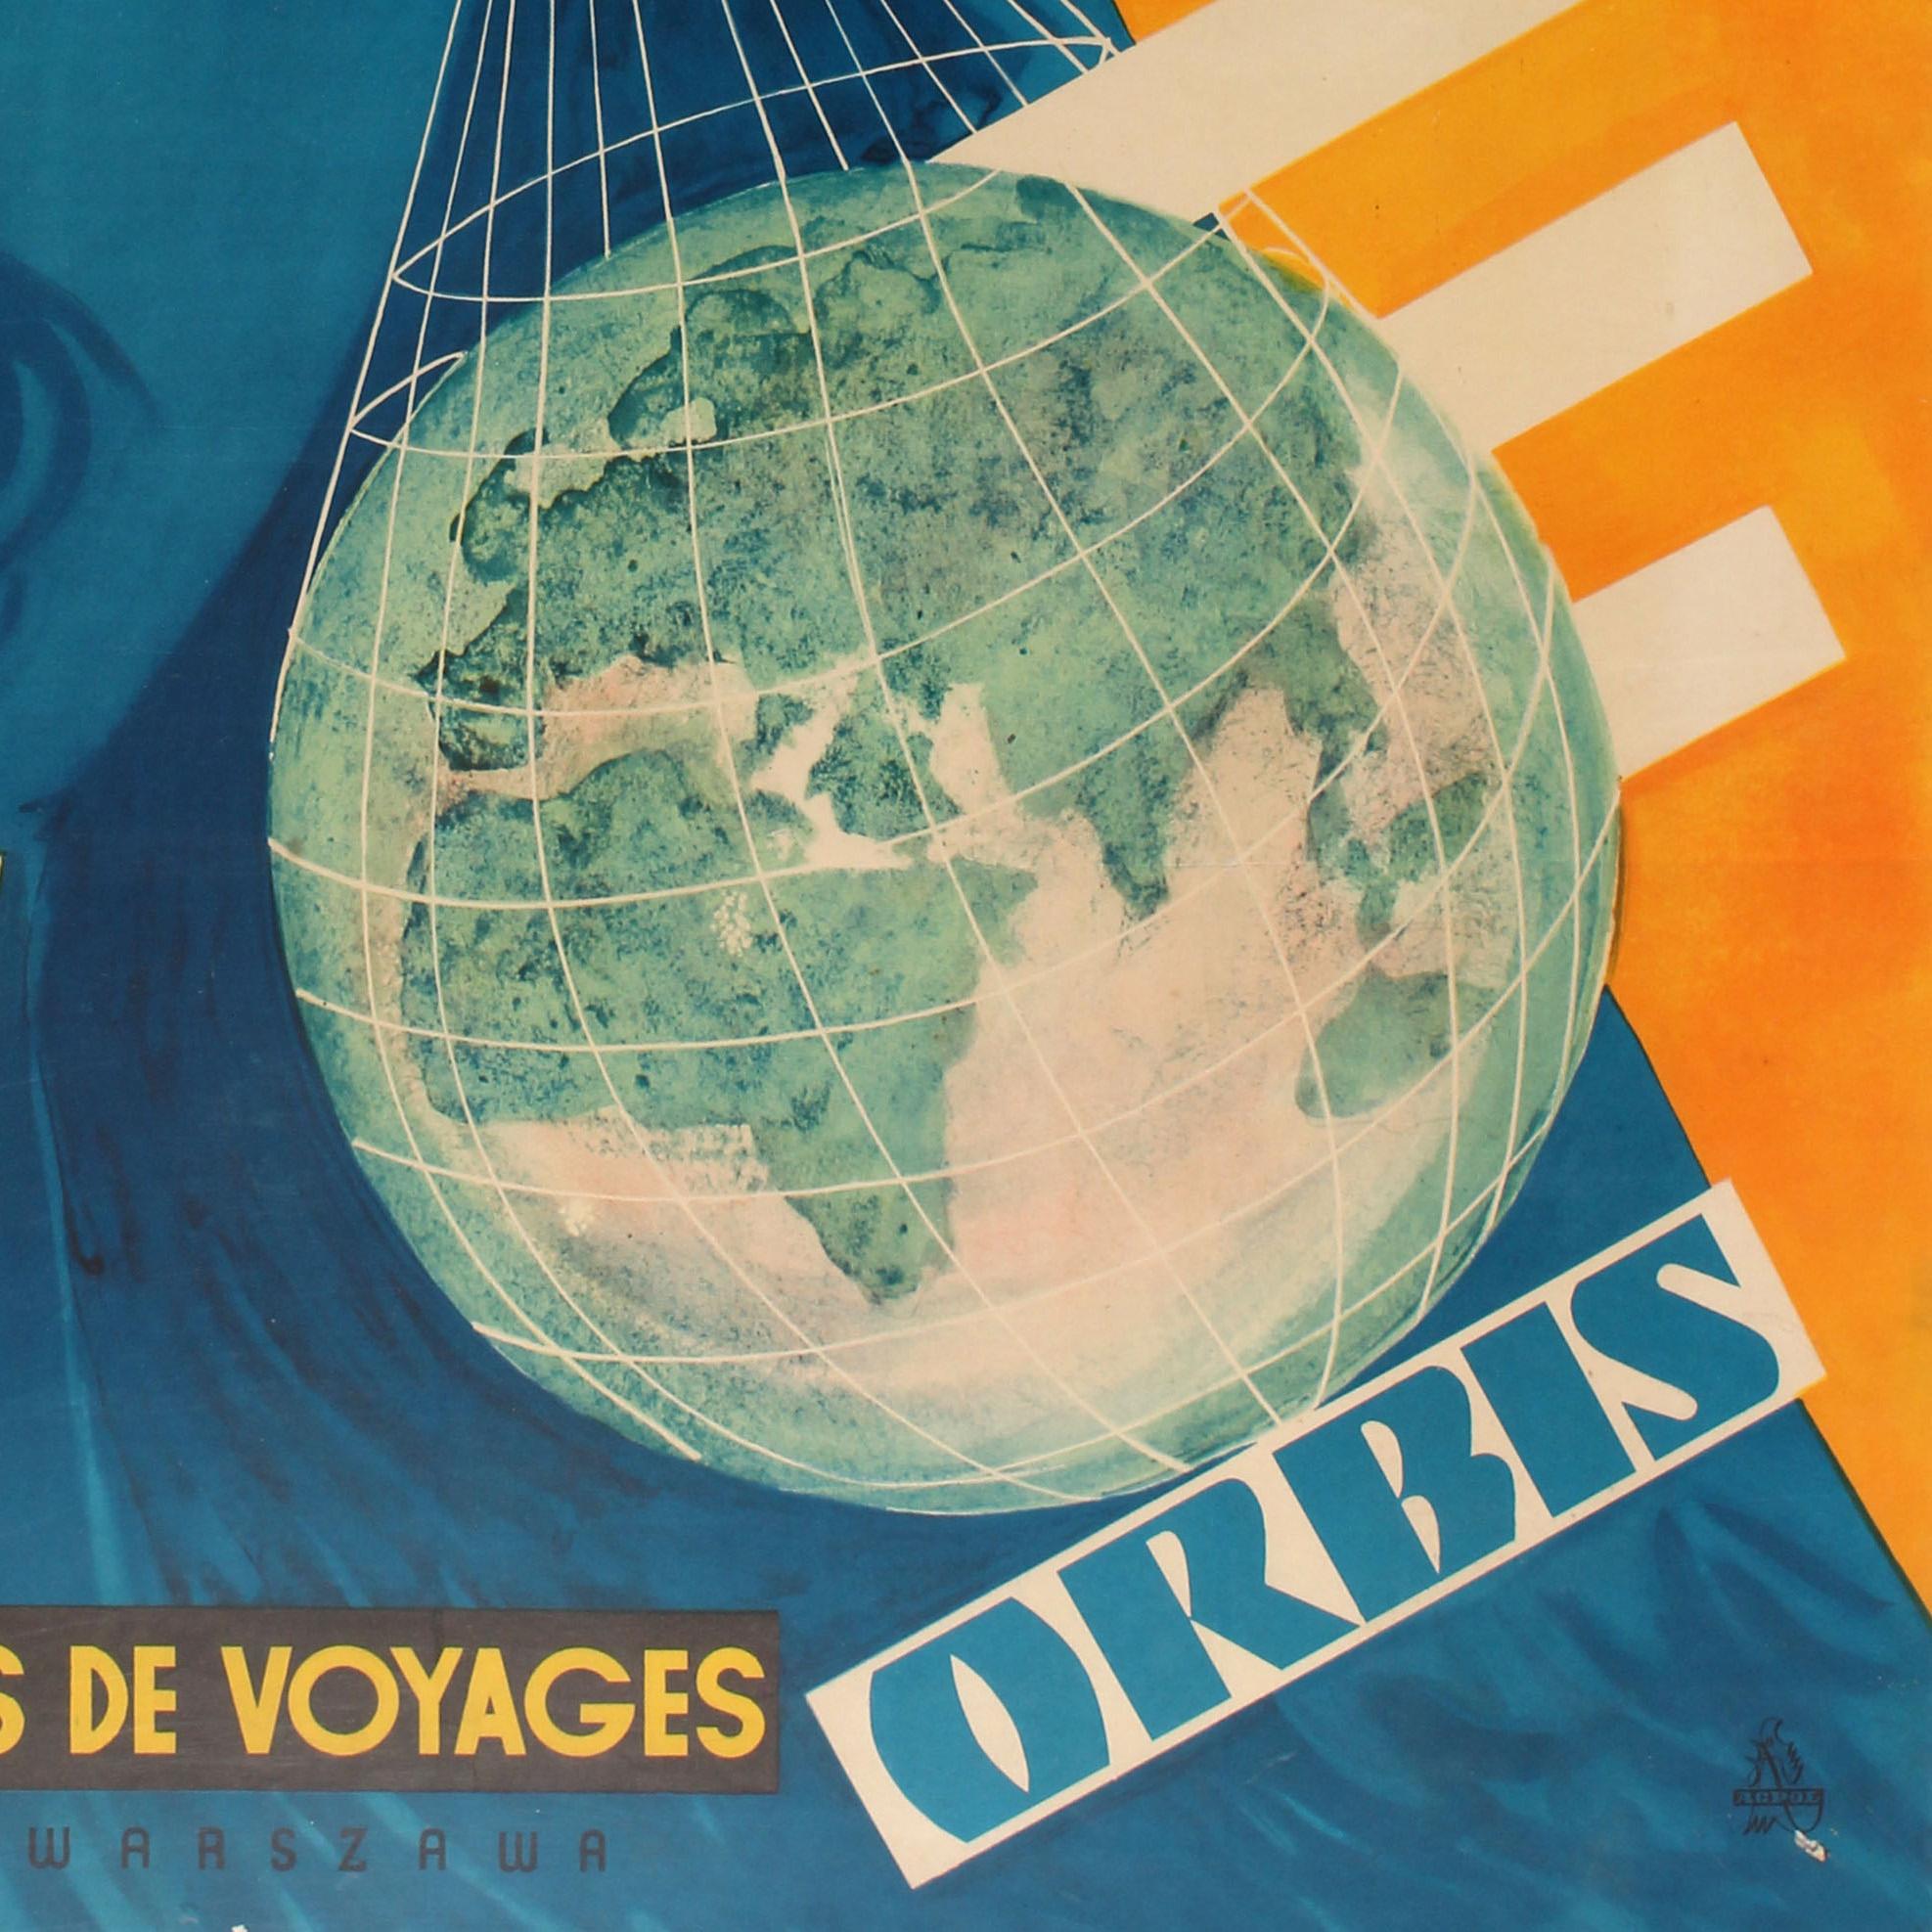 Original vintage advertising poster for the Polish travel agency Orbis Bureau Polonais de Voyages featuring a fun design showing a smiling lady in a blue coat and striped scarf carrying a net bag with a blue globe of the world as the Orbis logo set